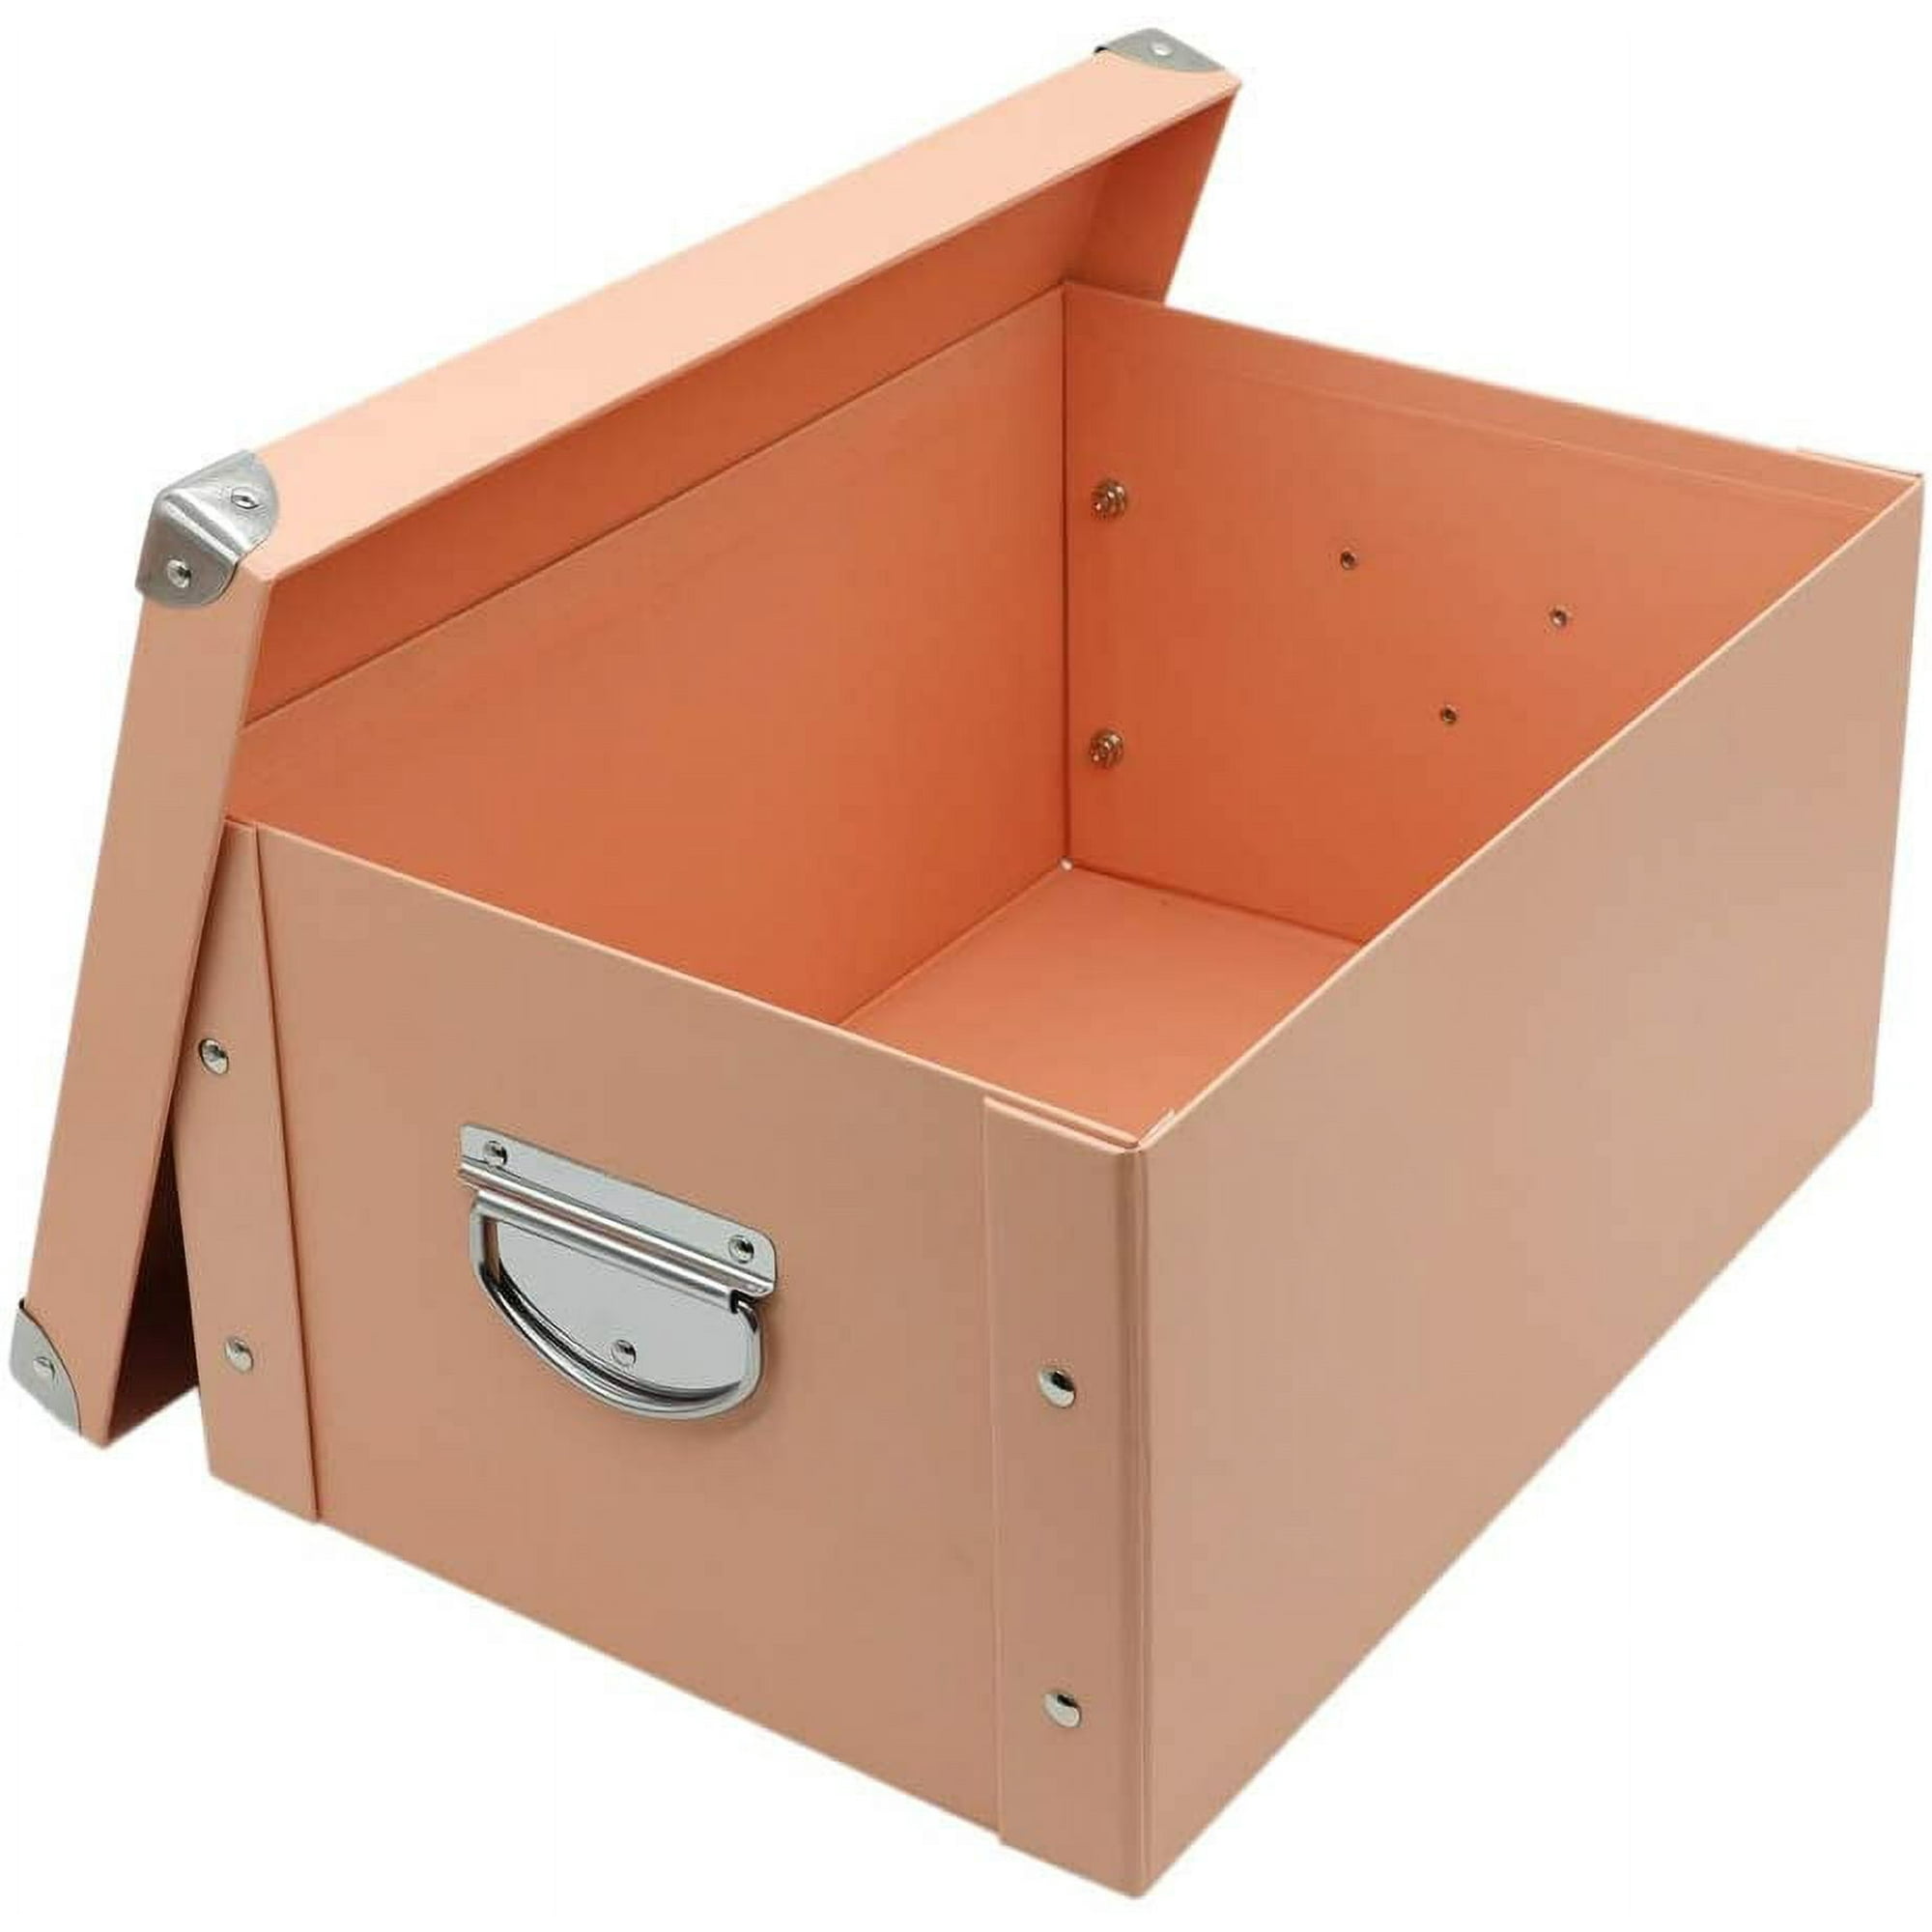 Collapsible Storage Box, Decorative Memory Box with Lid & Metal ...